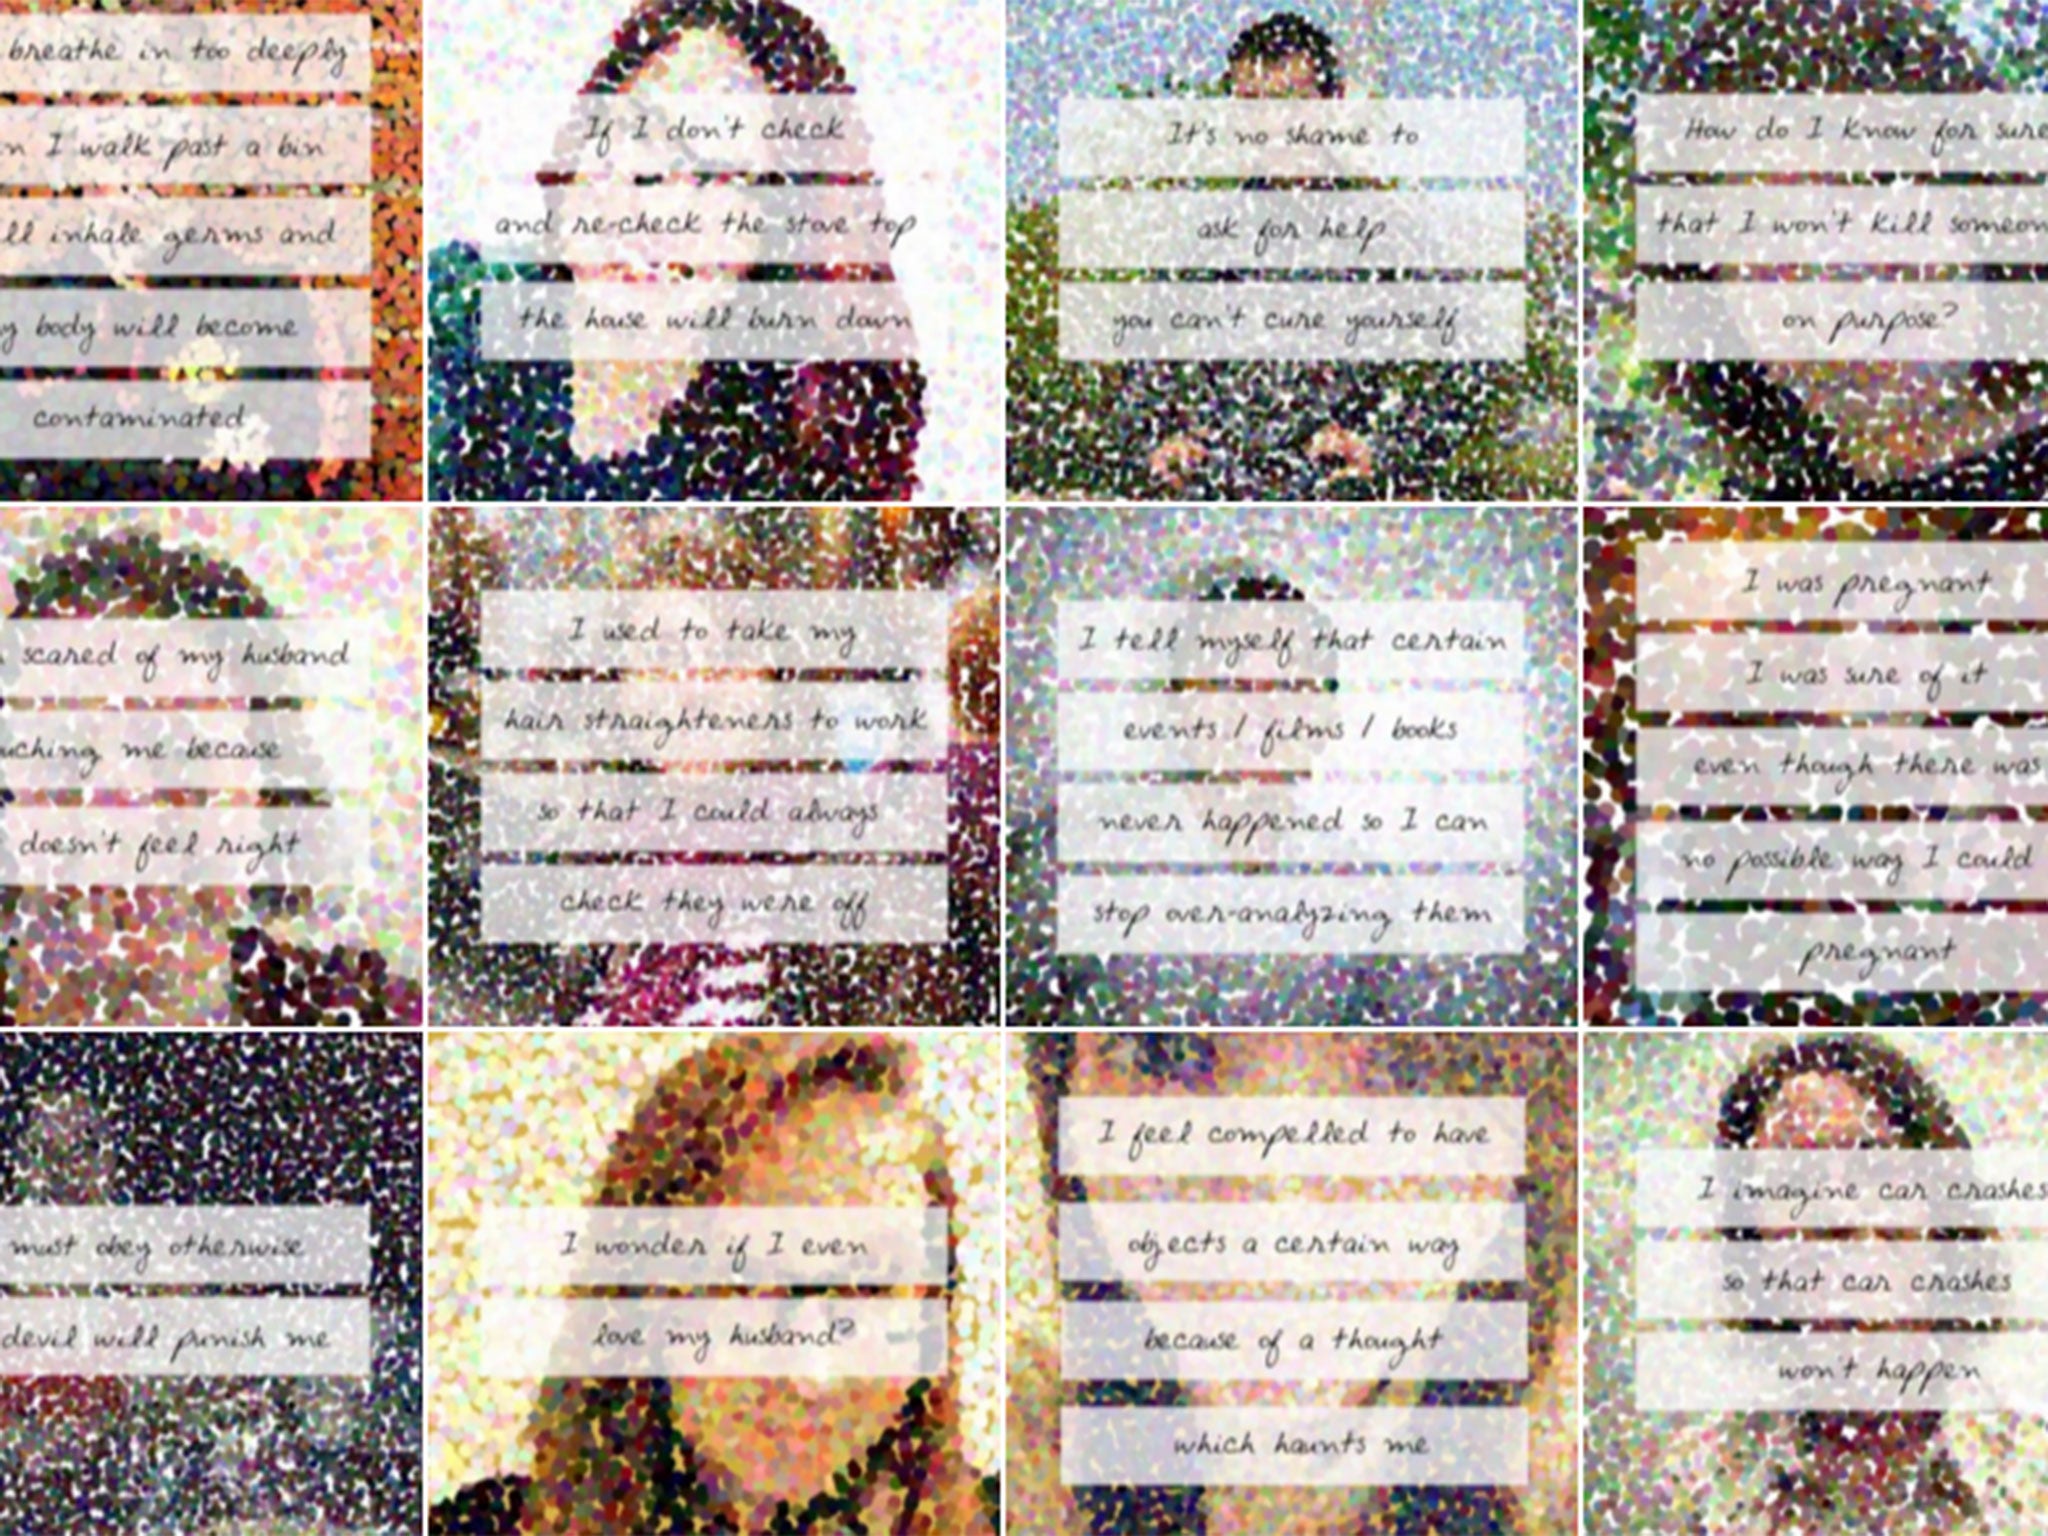 The Wall, where people with OCD share their thoughts on The Secret Illness website